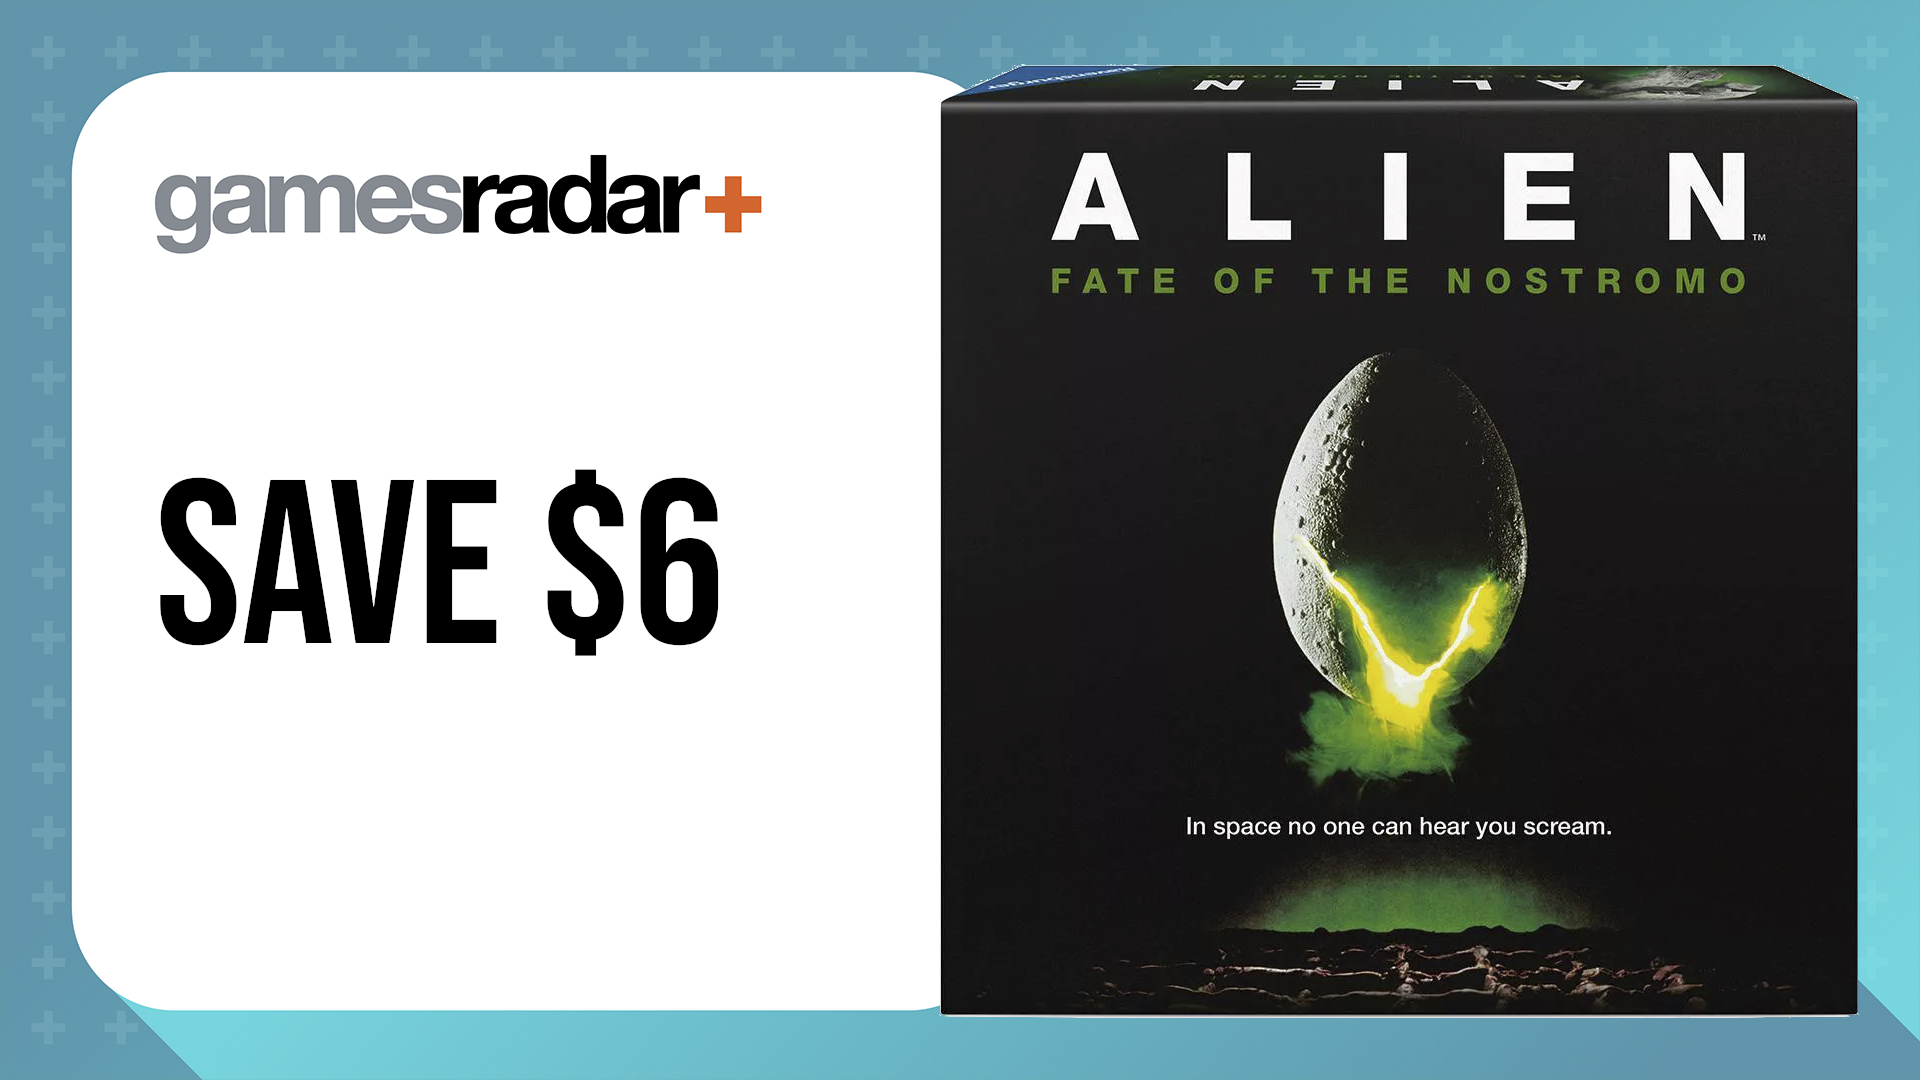 Black Friday board game deals with Alien: Fate of the Nostromo